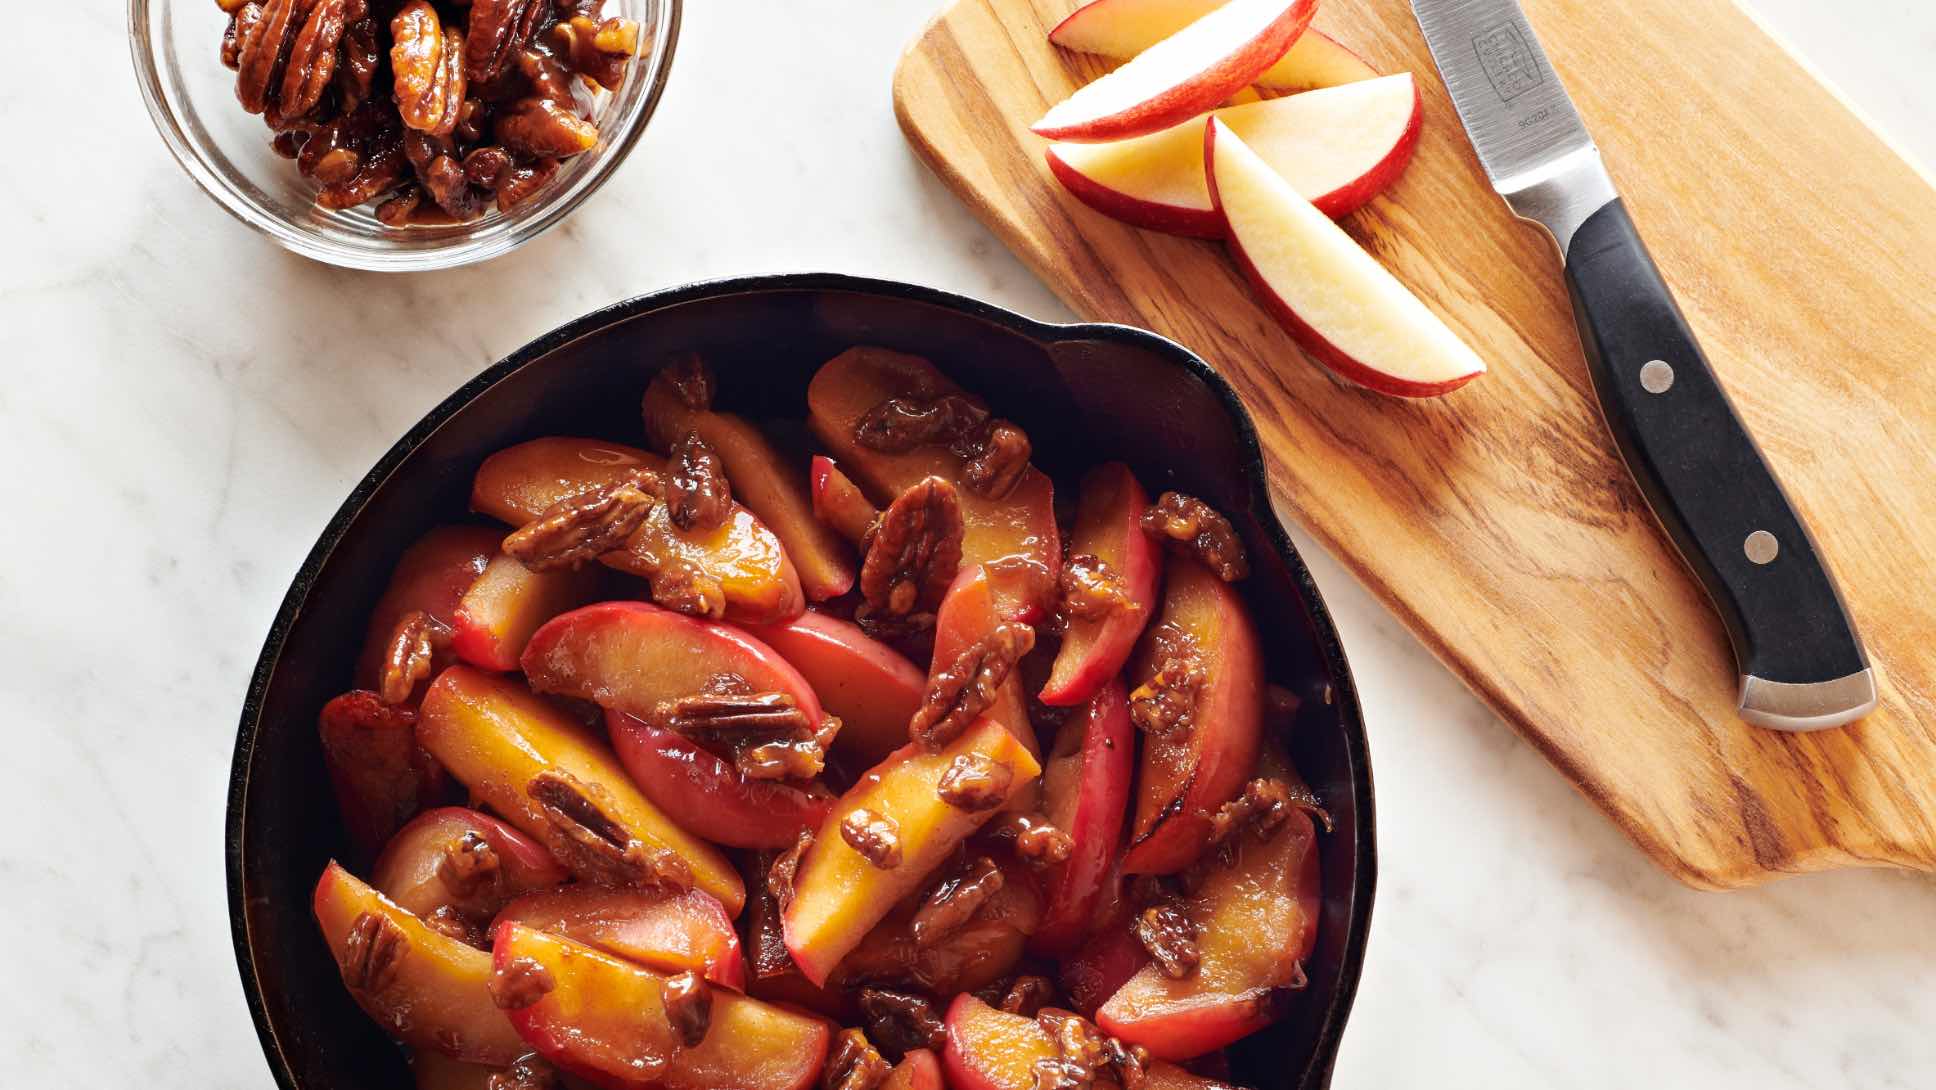 A cast-iron skillet of sauteed apples with maple-glazed pecans next to slices of apple and a bowl of pecans.